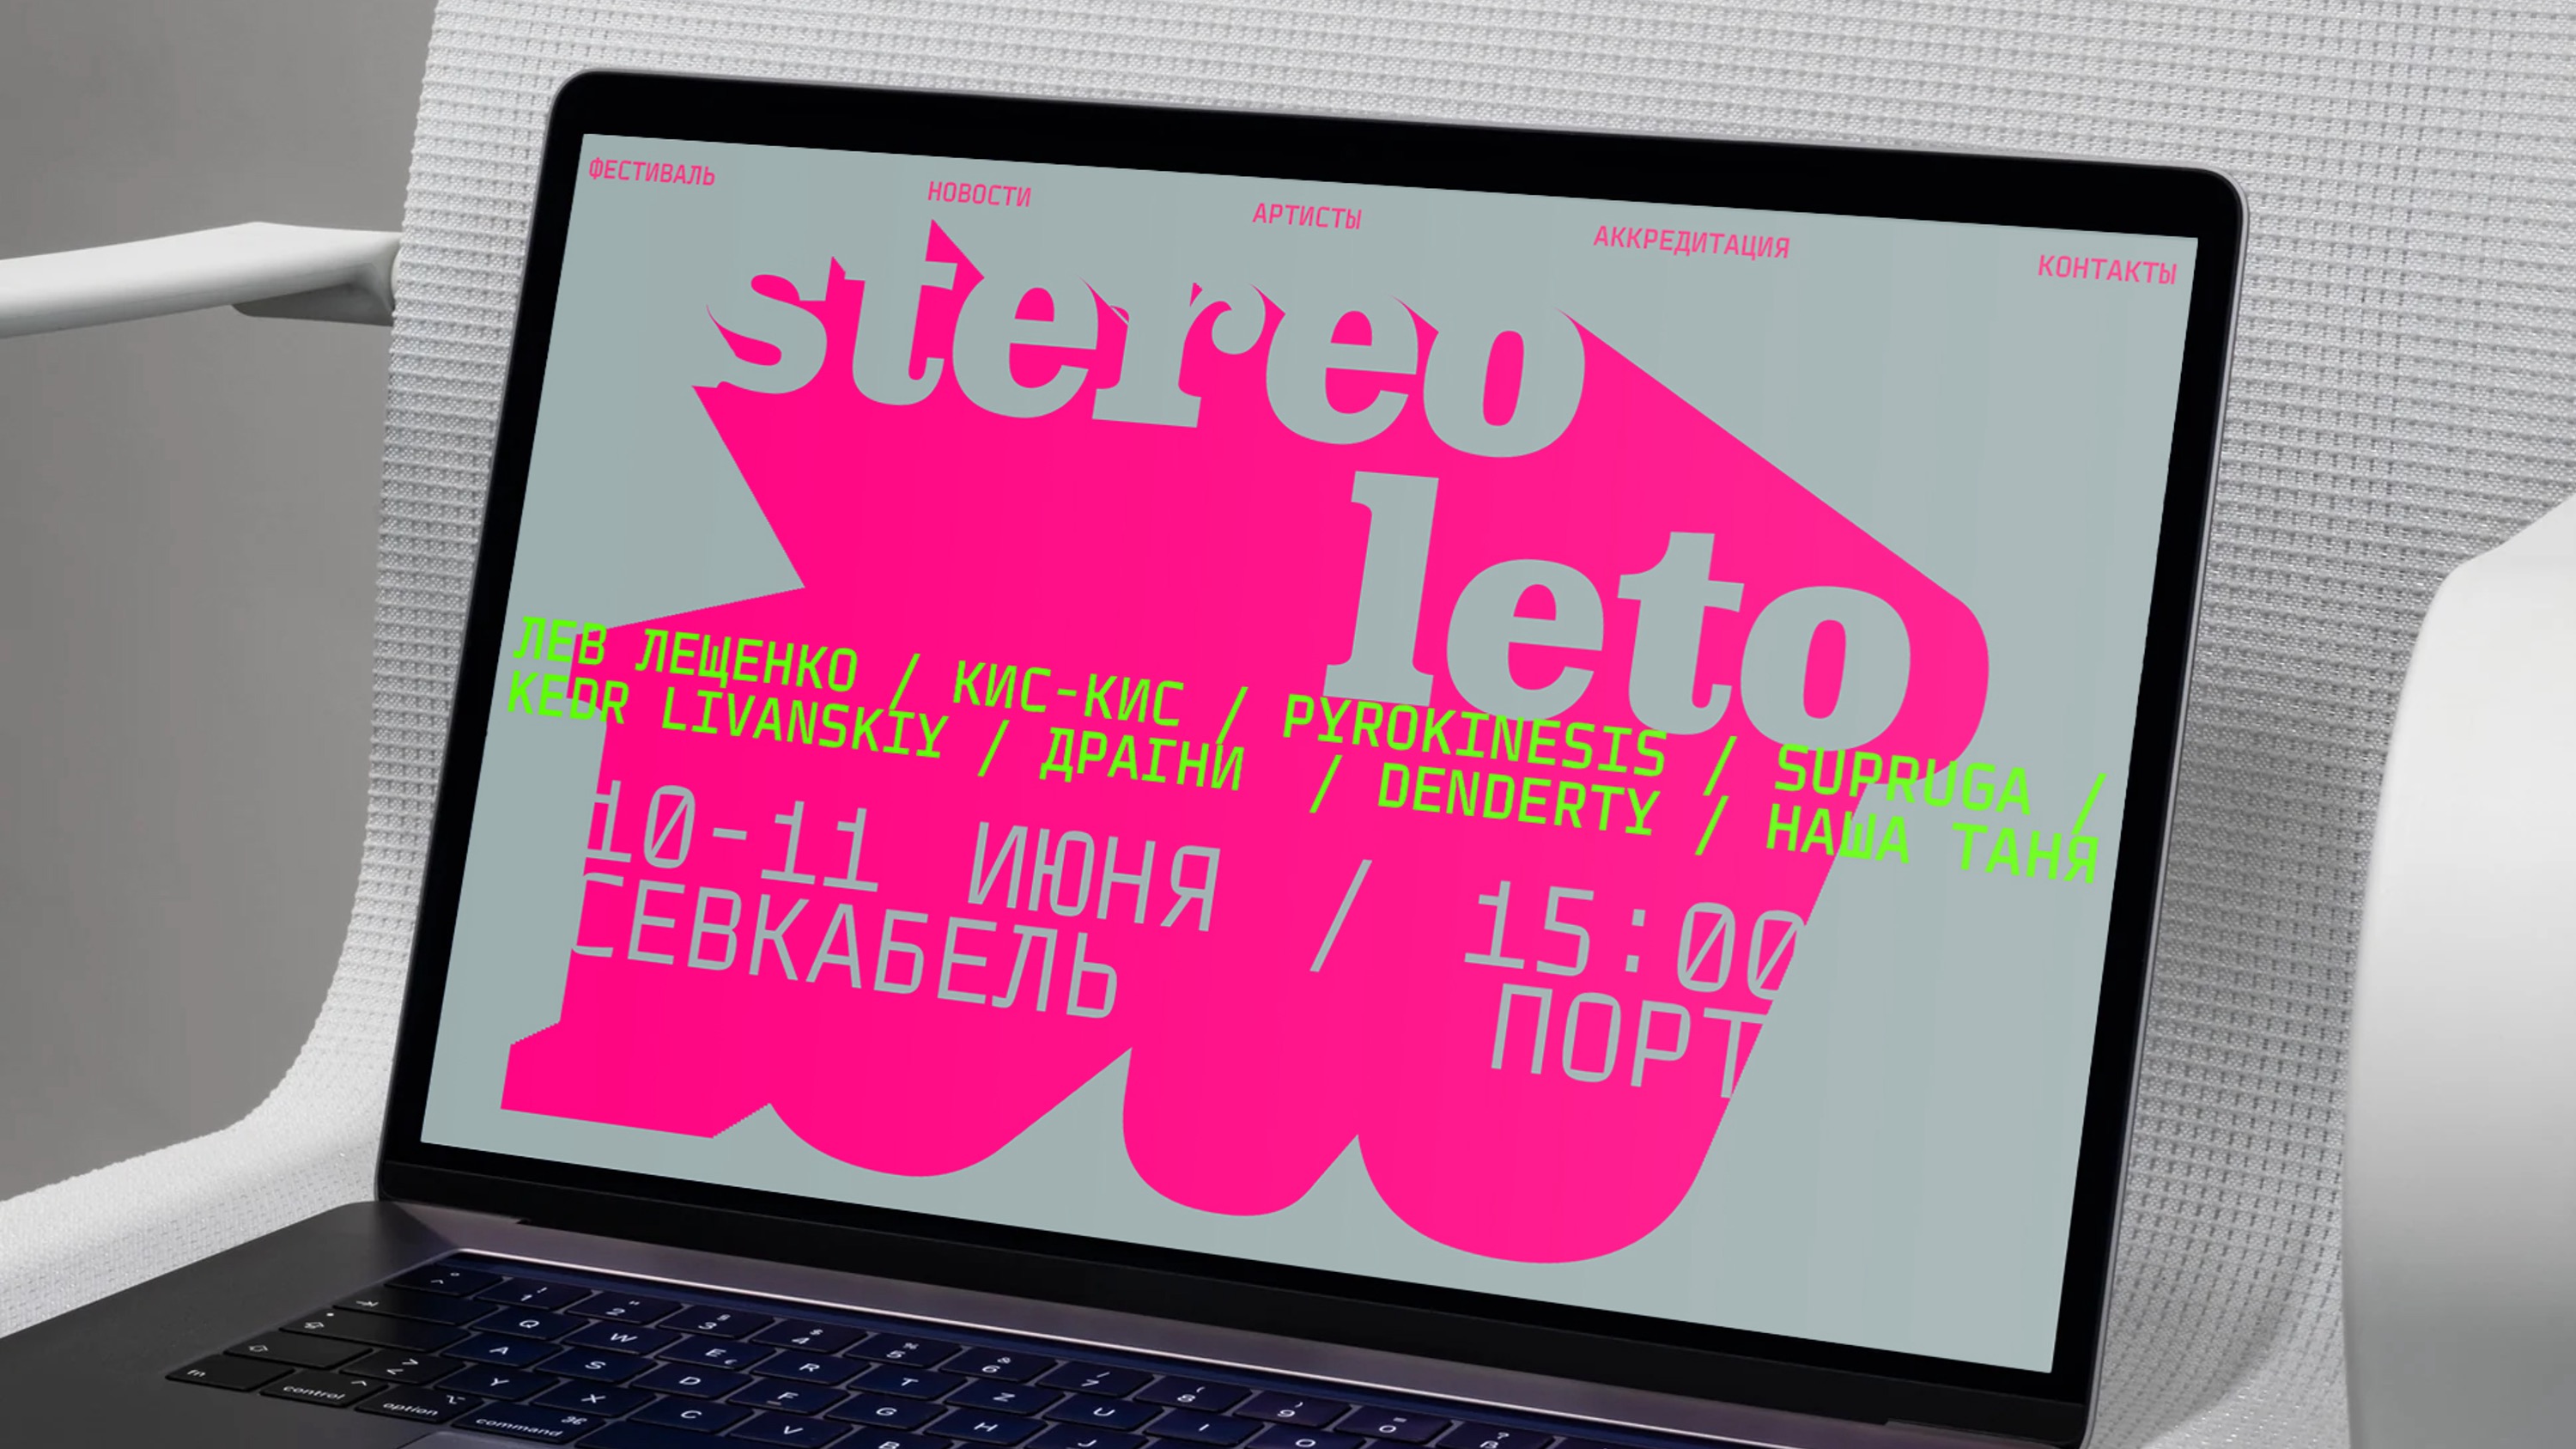 Concept of the Stereoleto Music Festival’s Identity